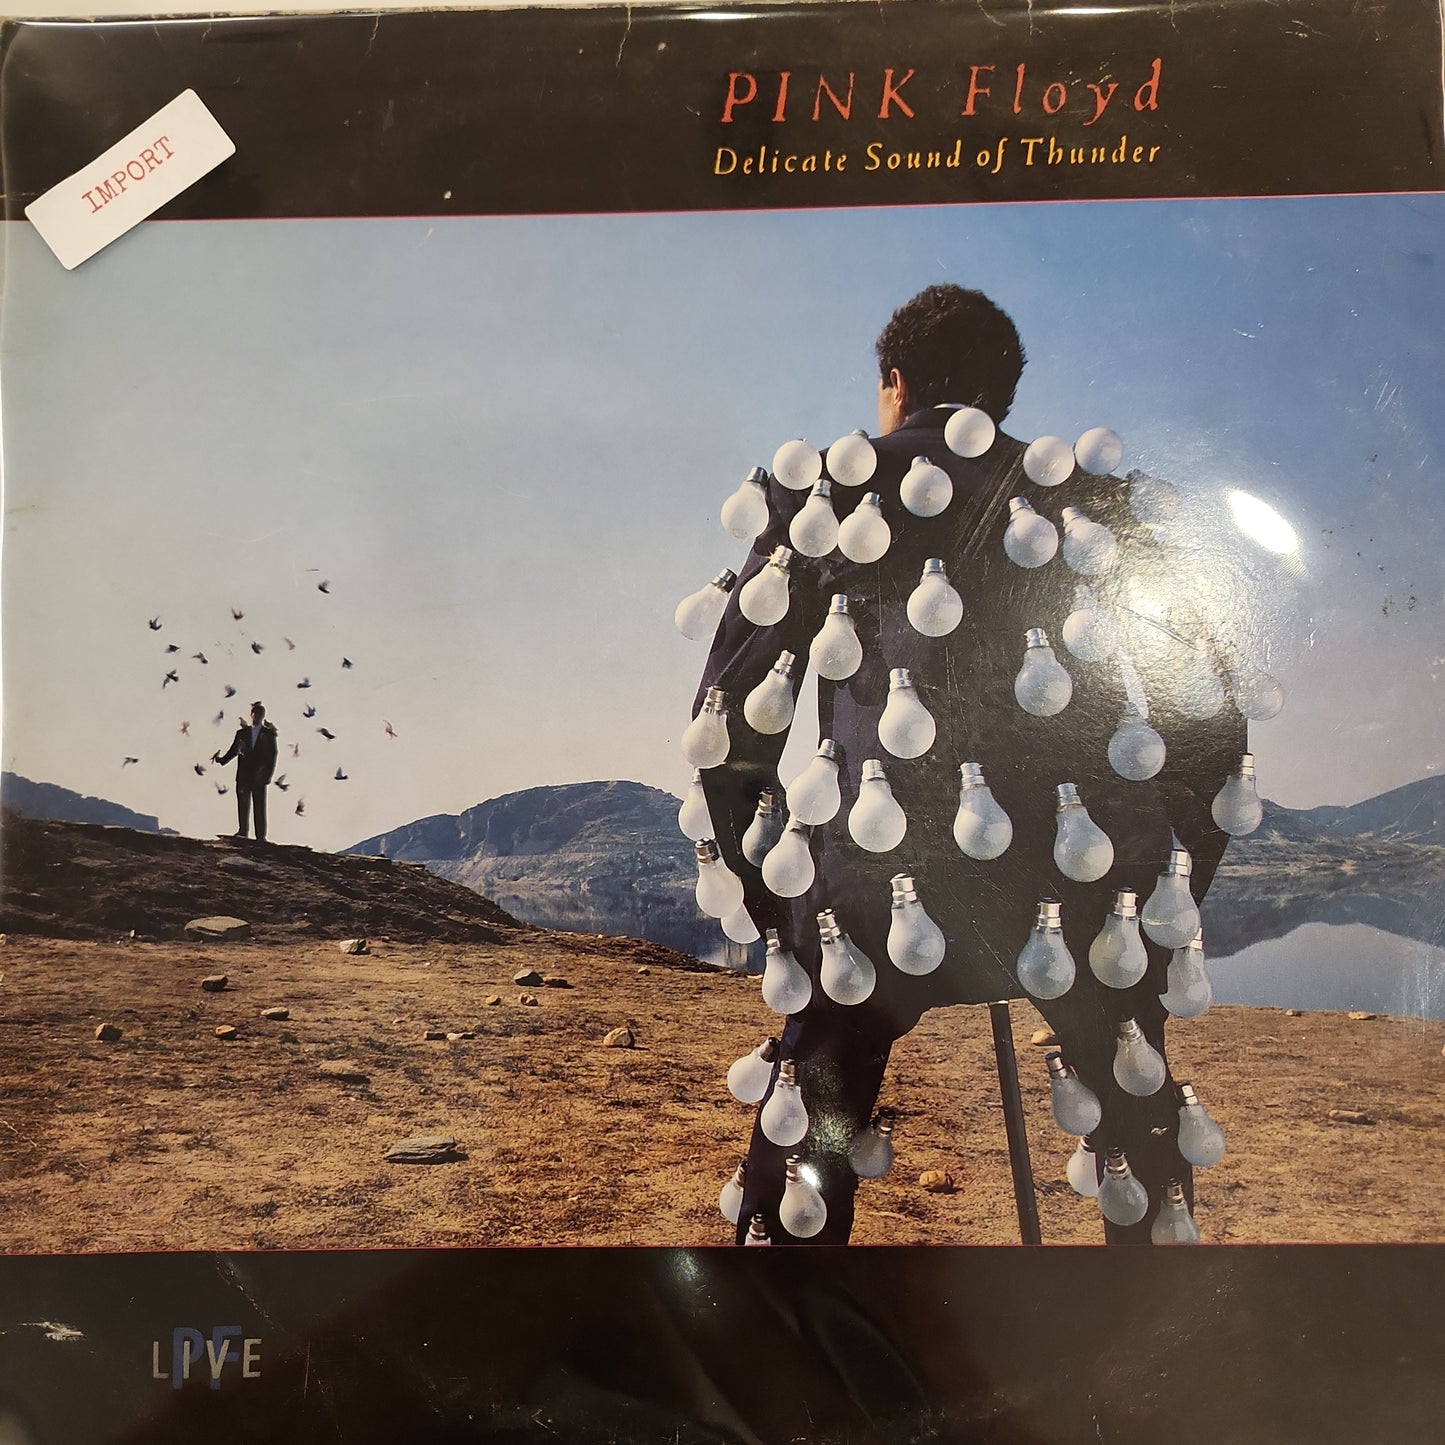 Pink Floyd - The Delicate Sound Of Thunder